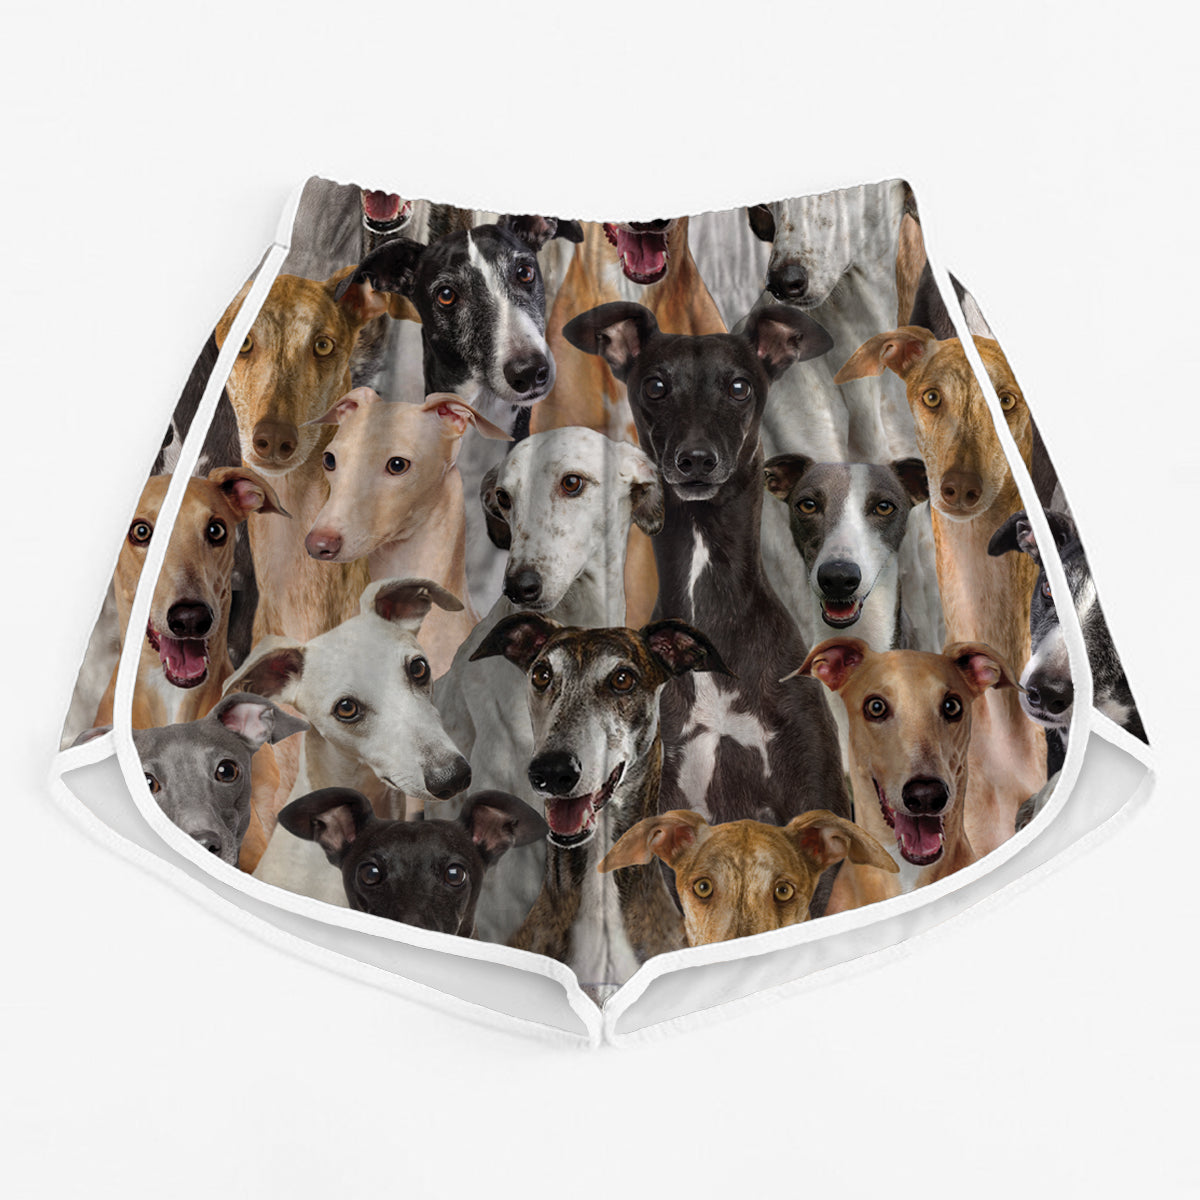 You Will Have A Bunch Of Greyhounds - Women's Running Shorts V1